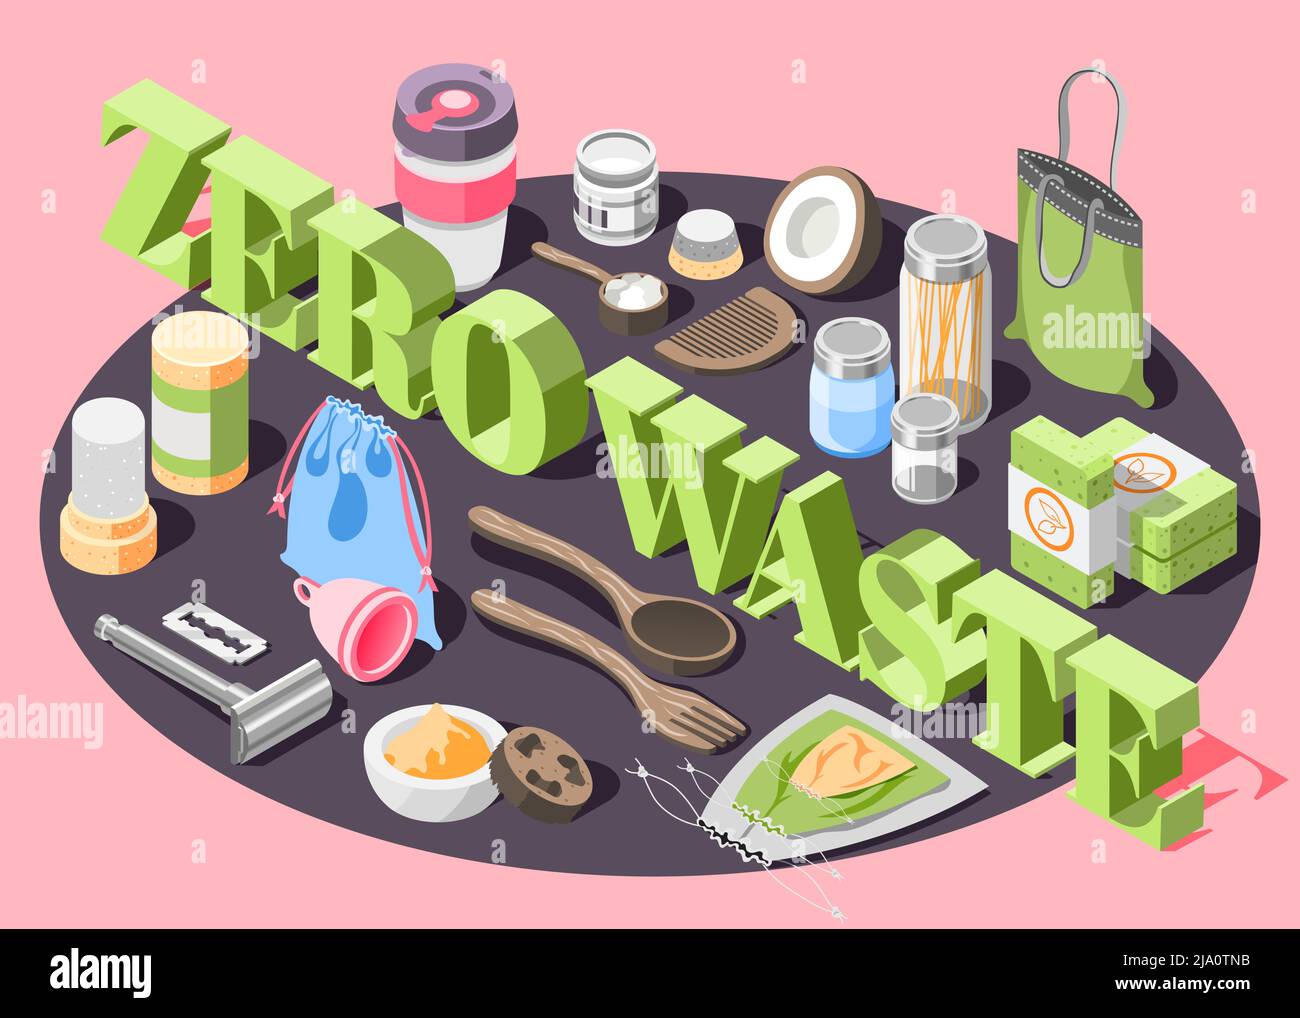 https://c8.alamy.com/comp/2JA0TNB/zero-waste-isometric-composition-with-eco-friendly-bags-cosmetics-cutlery-personal-things-3d-vector-illustration-2JA0TNB.jpg